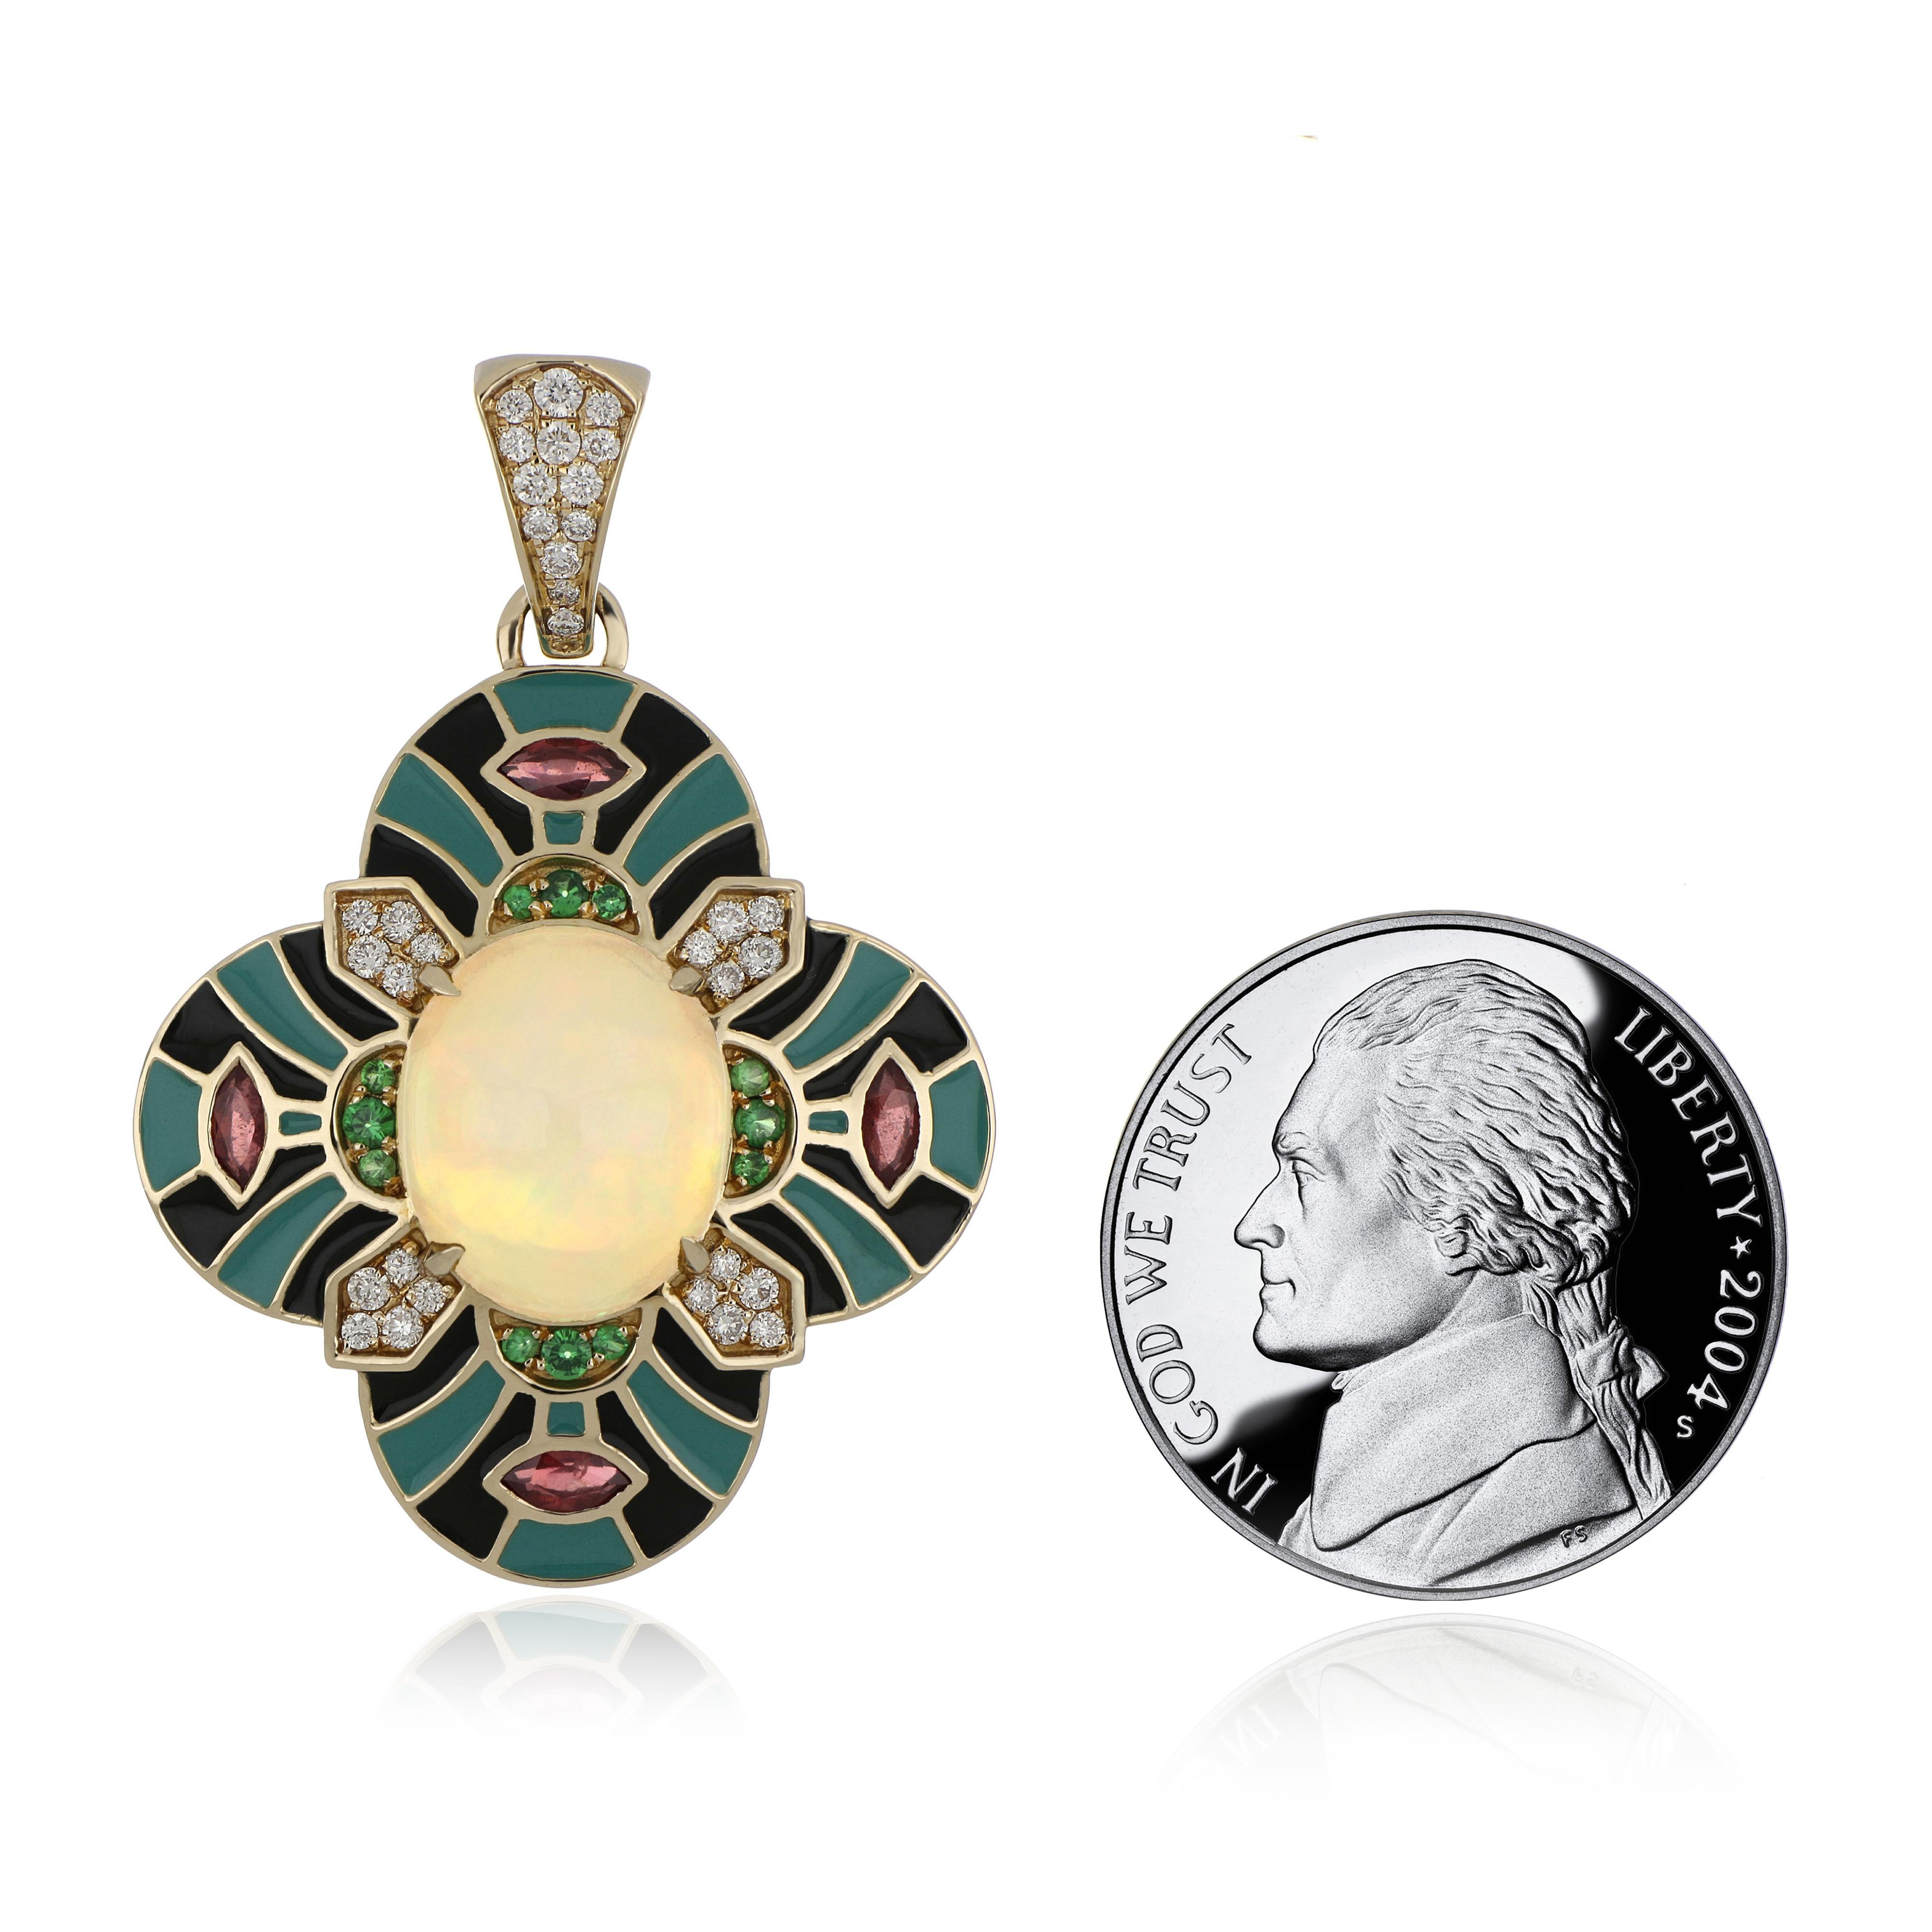 Elegant and exquisite Enamel Cocktail 14 K Pendant, center set with 2.89 Cts. Oval Cabochon Ethiopian Opal, accented with Diamonds, weighing approx. 0.12 Cts and Surrounded with 0.49 Cts of Marquise Cut Ruby and  0.11 Cts, of Tsavorite Beautifully